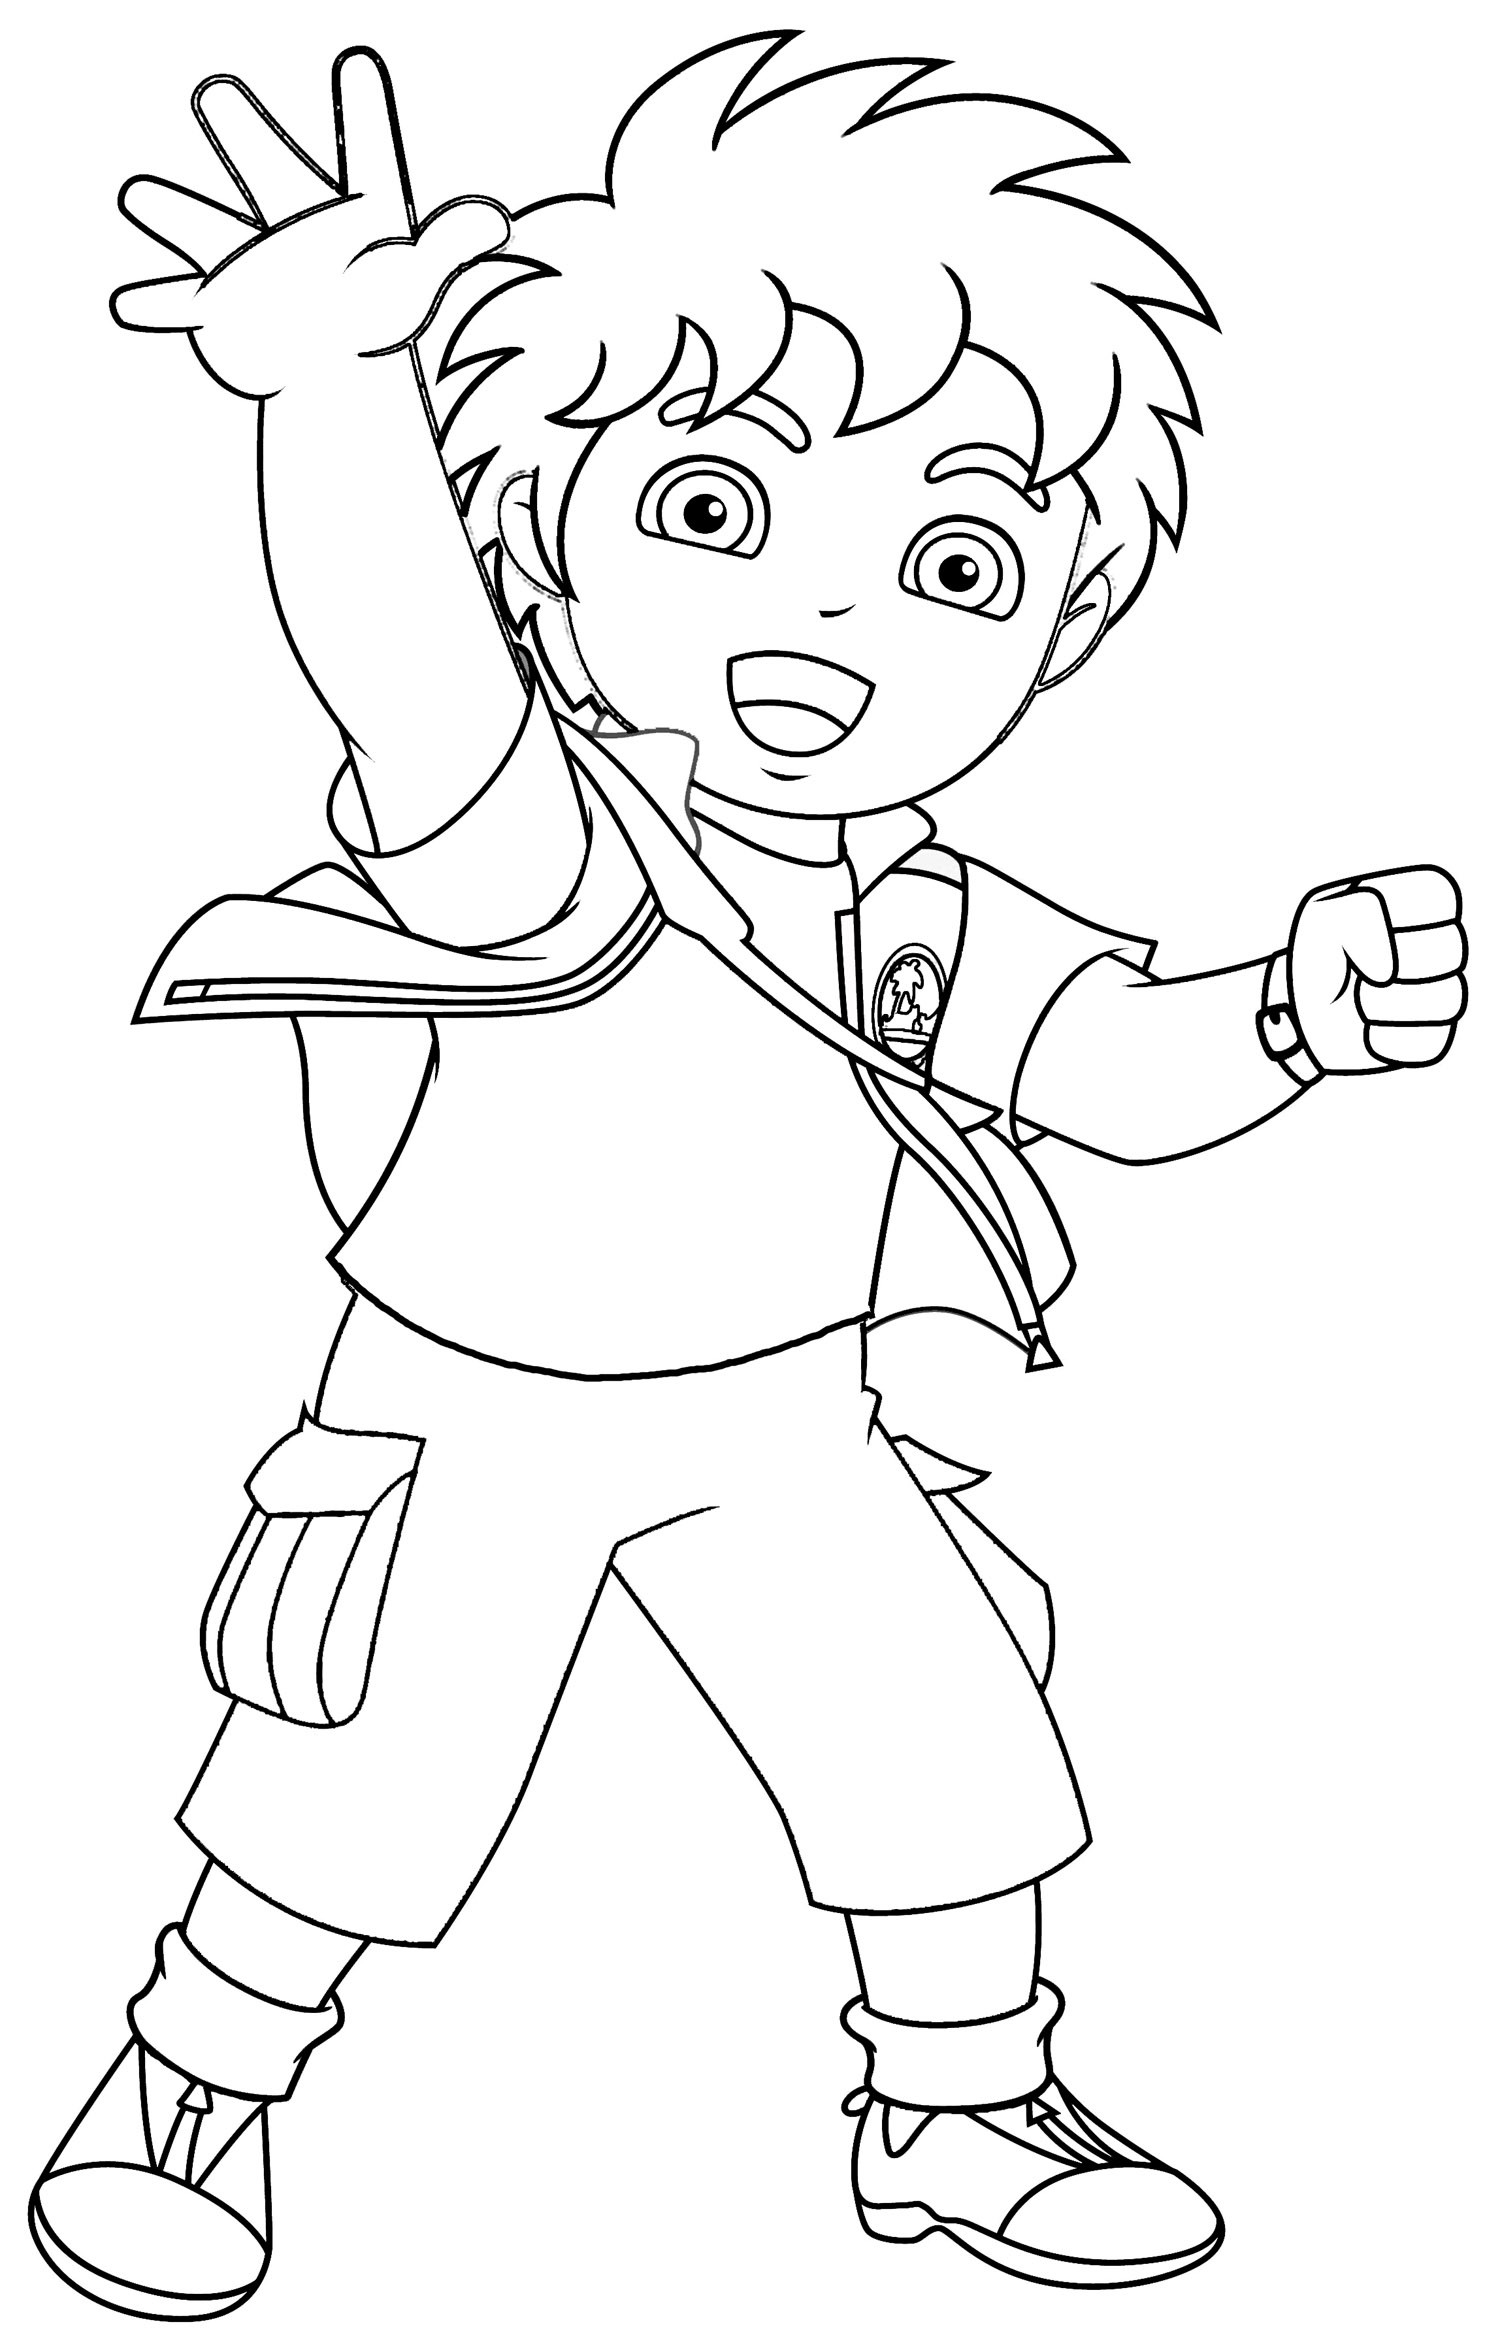 Coloring Pages For Little Boys
 Little Boy 95 Characters – Printable coloring pages